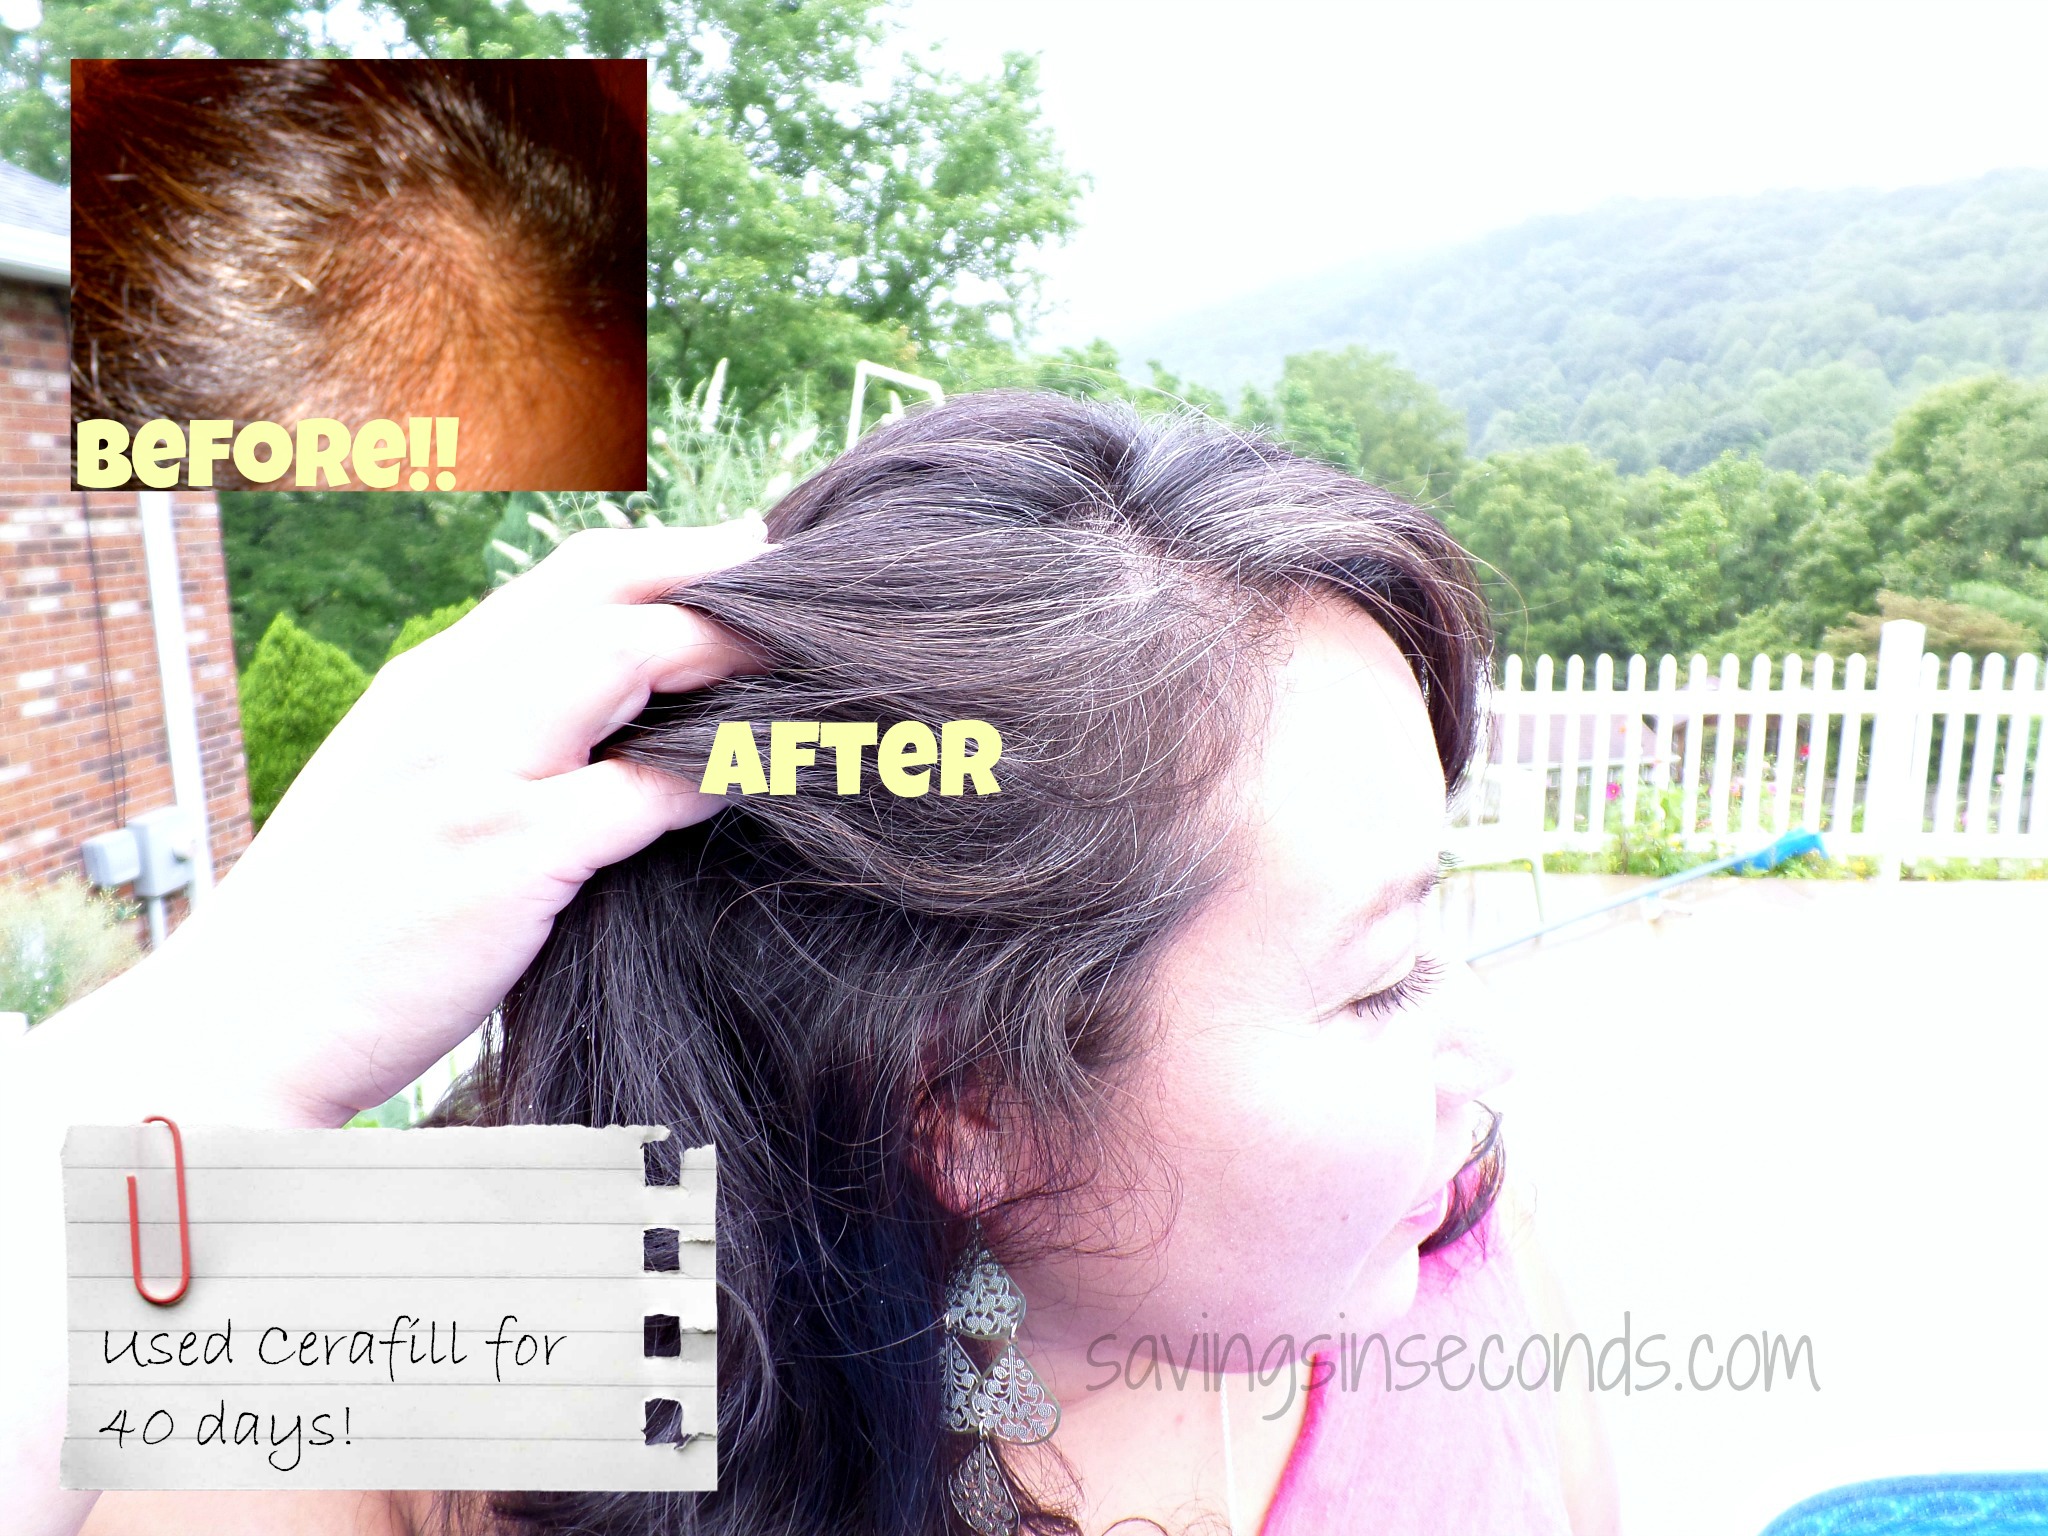 thinning hair post-baby or due to heredity? try #cerafill